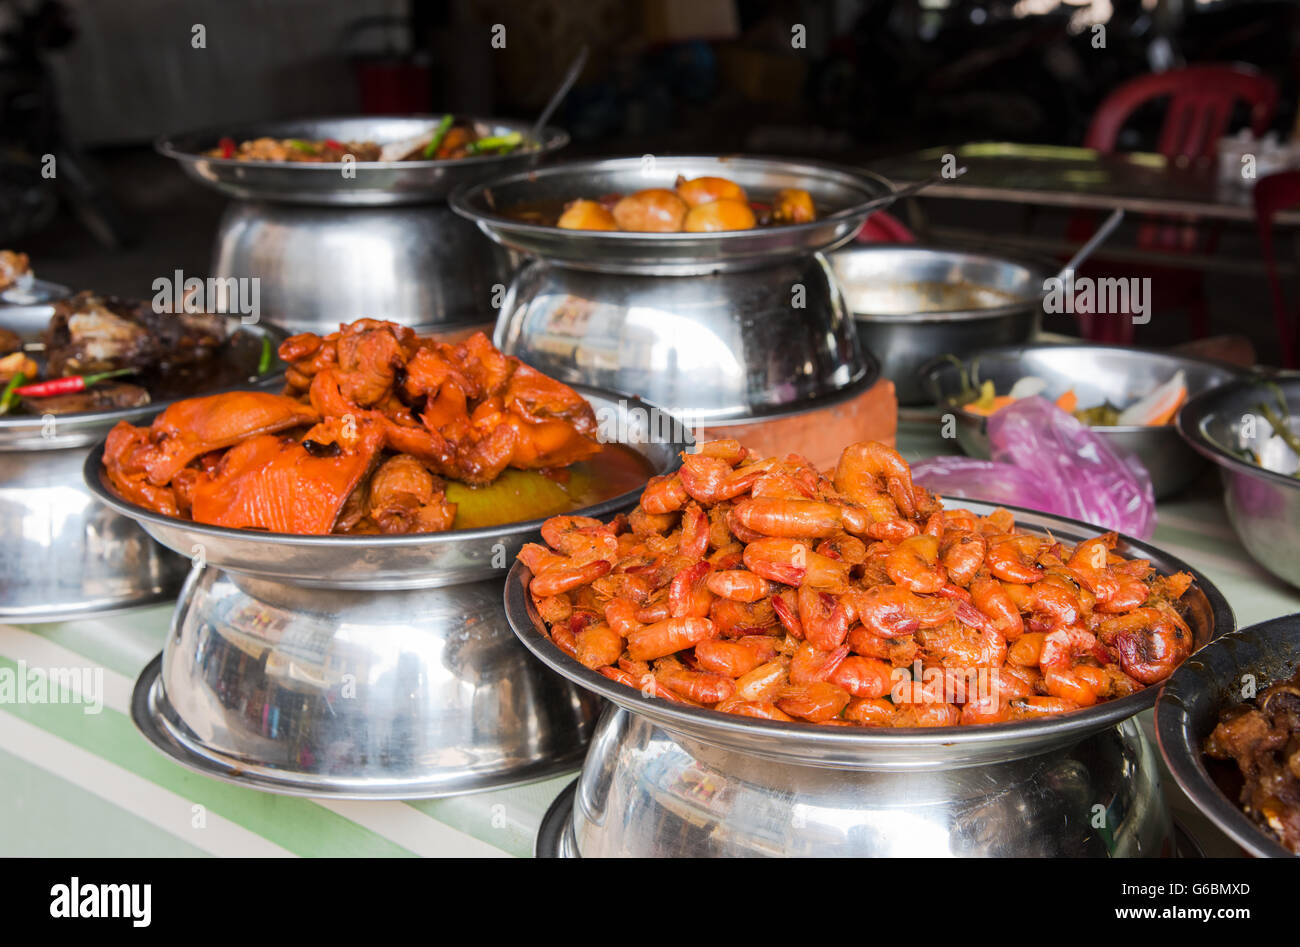 Local Vietnamese food at a market in Cao Lanh, the capital of Dong Thap Province in Vietnam. Stock Photo